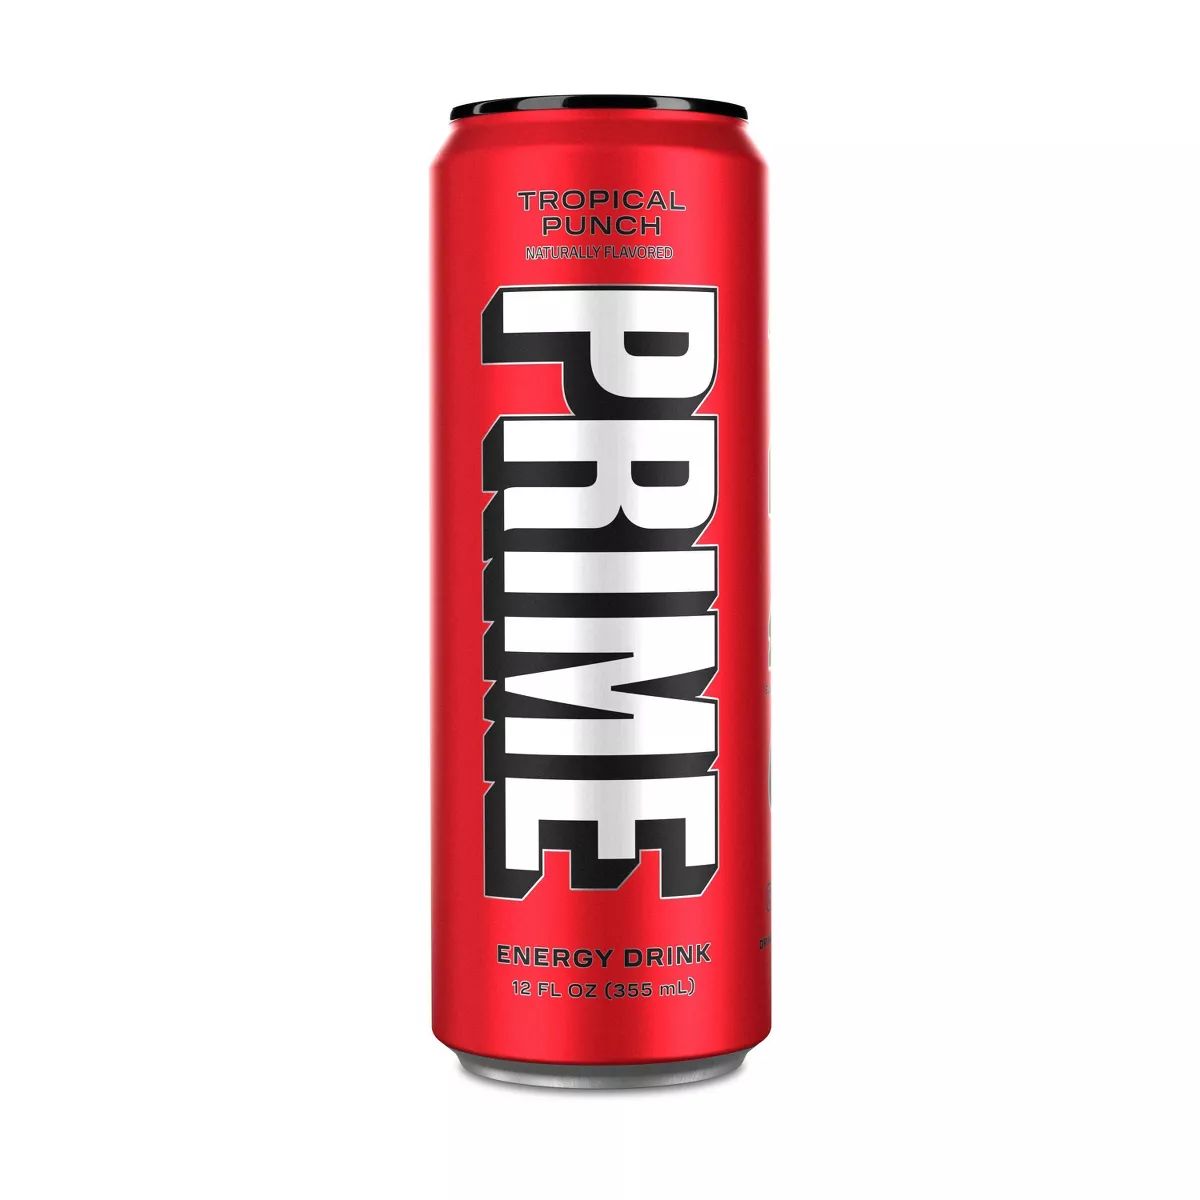 Prime Tropical Punch Energy Drink - 12 fl oz Can | Target